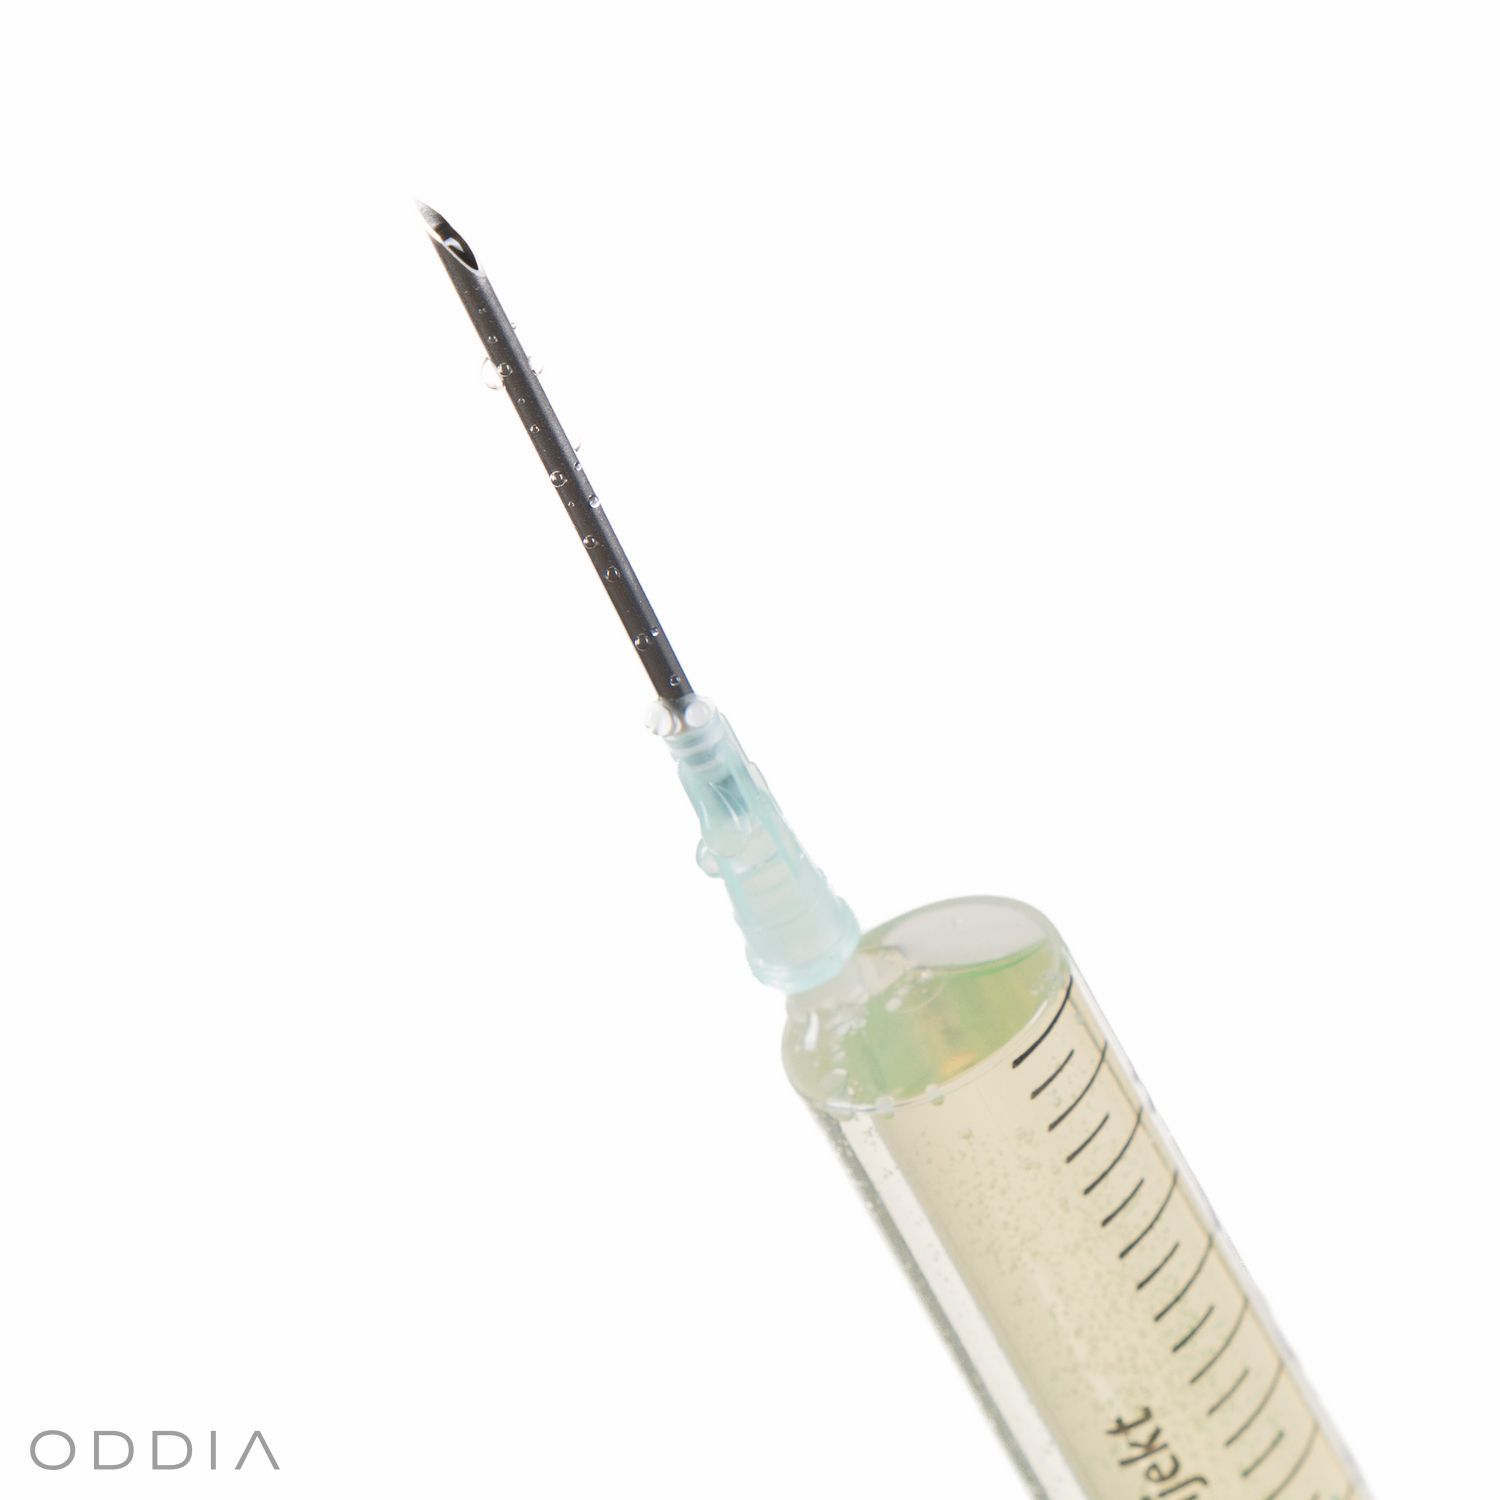 Detail of the injection needle tip on the syringe